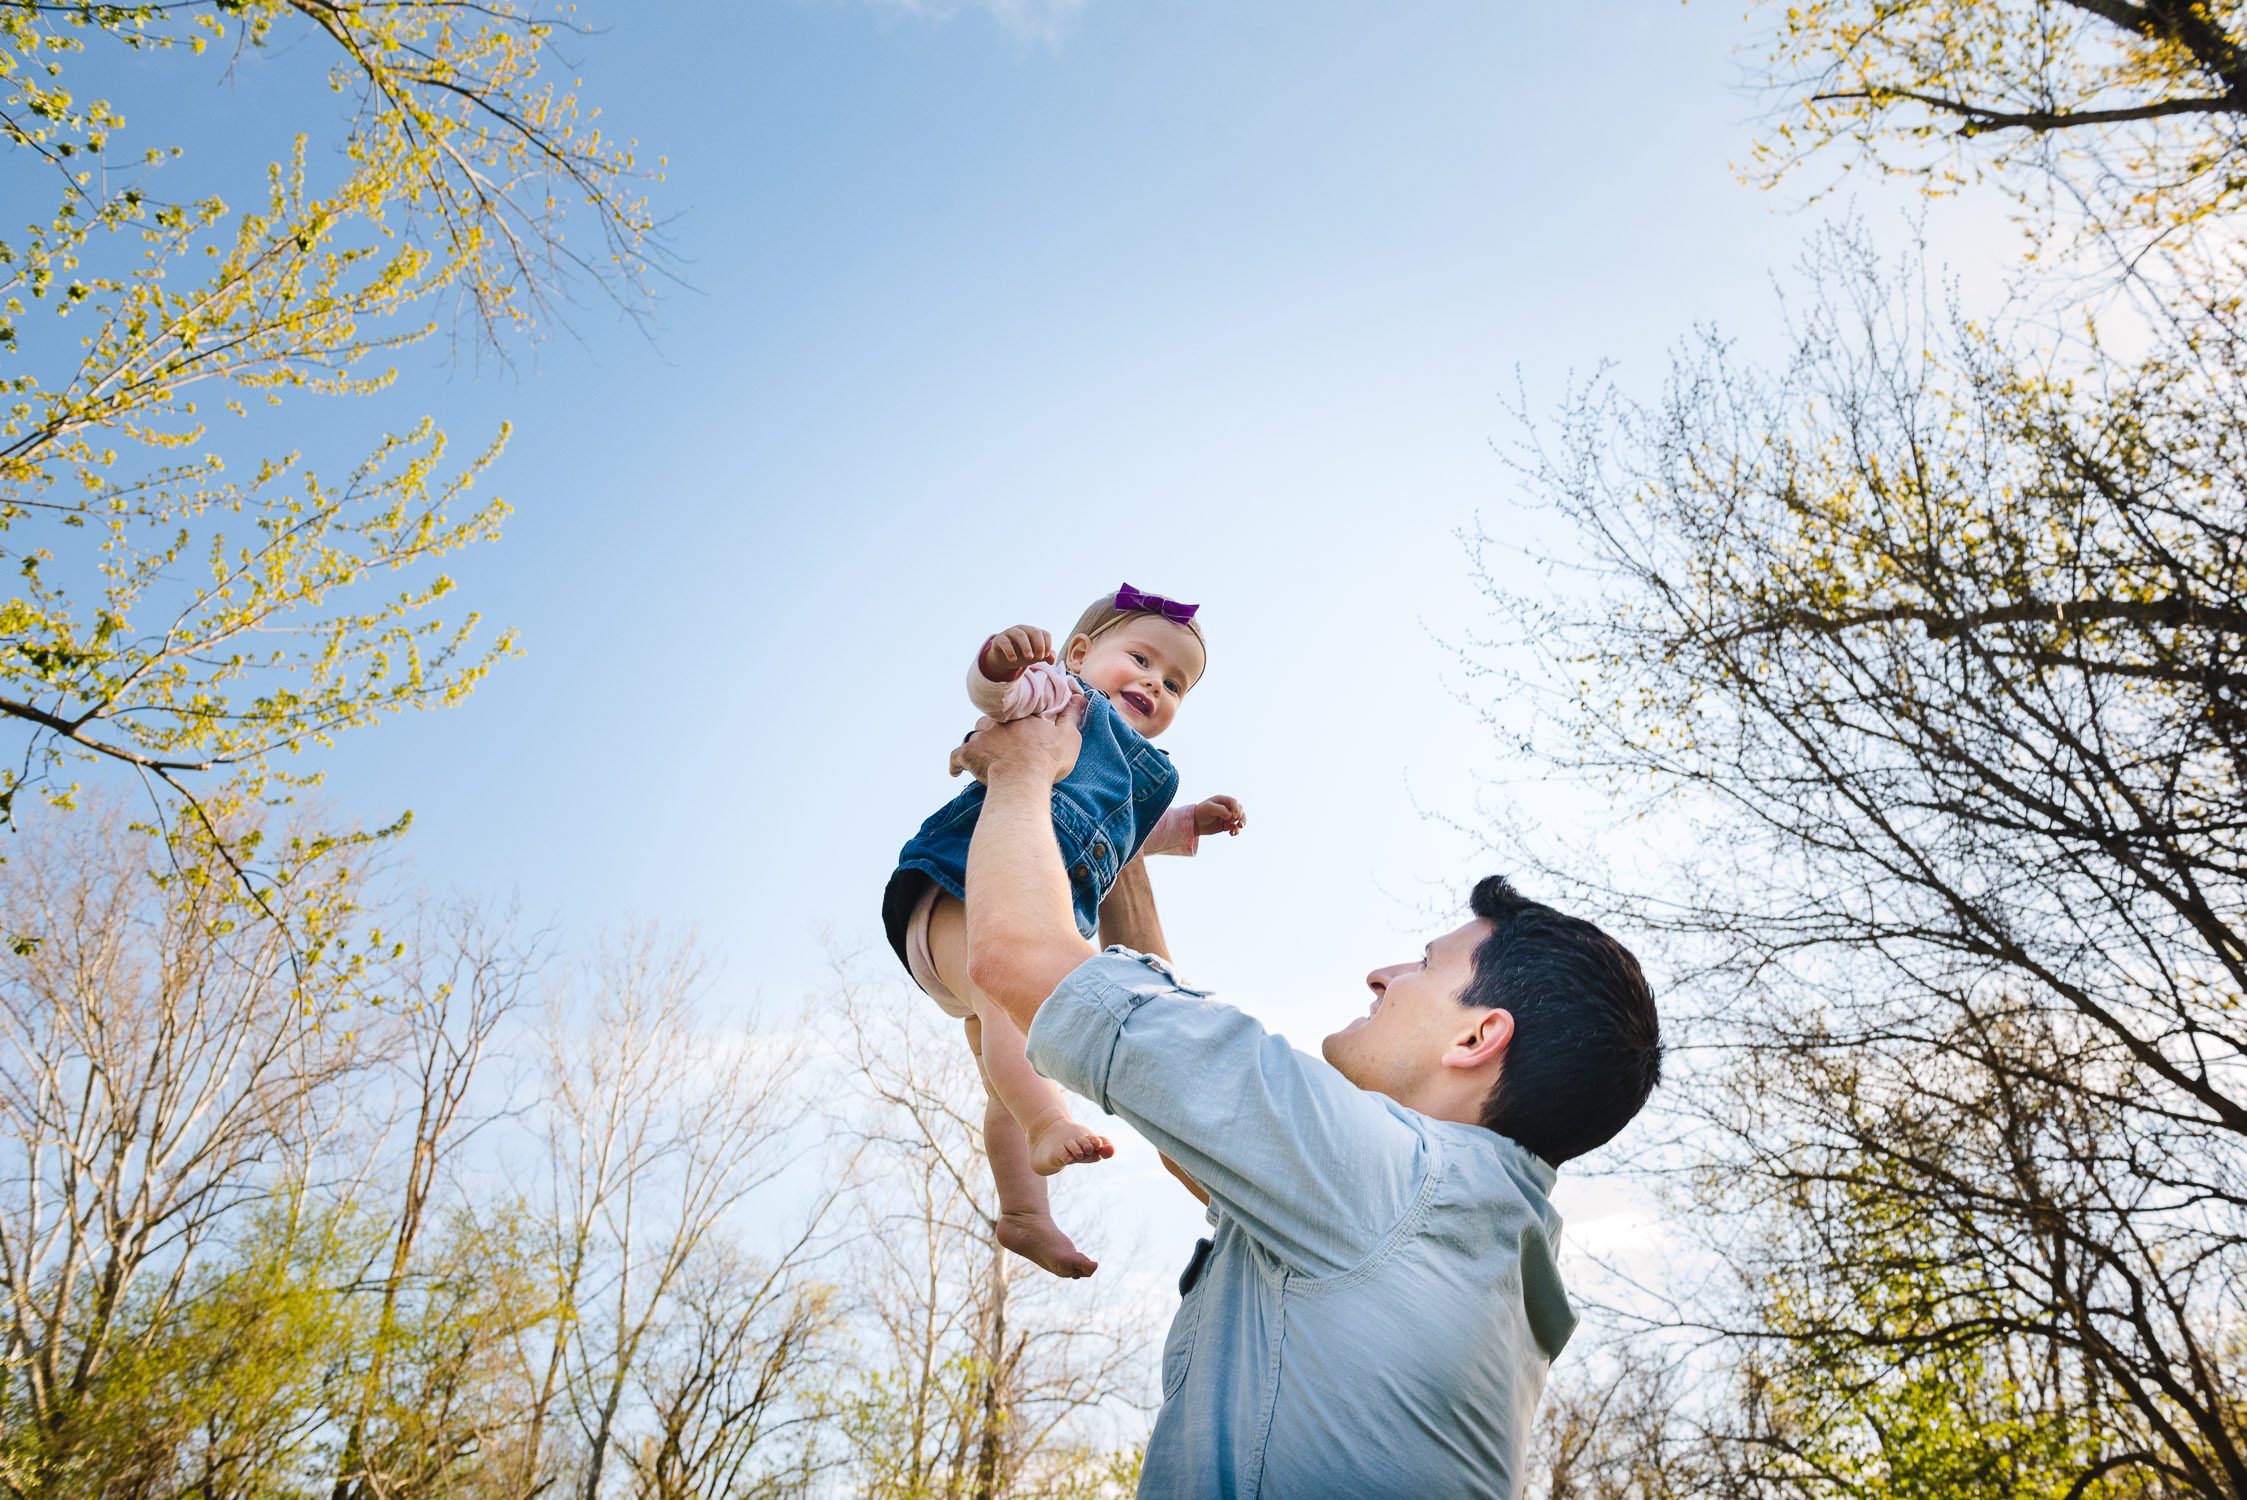 Daddy holding daughter for Kasmann Family Photos by Schaefer Photography in Capen Park, Columbia, Missouri.